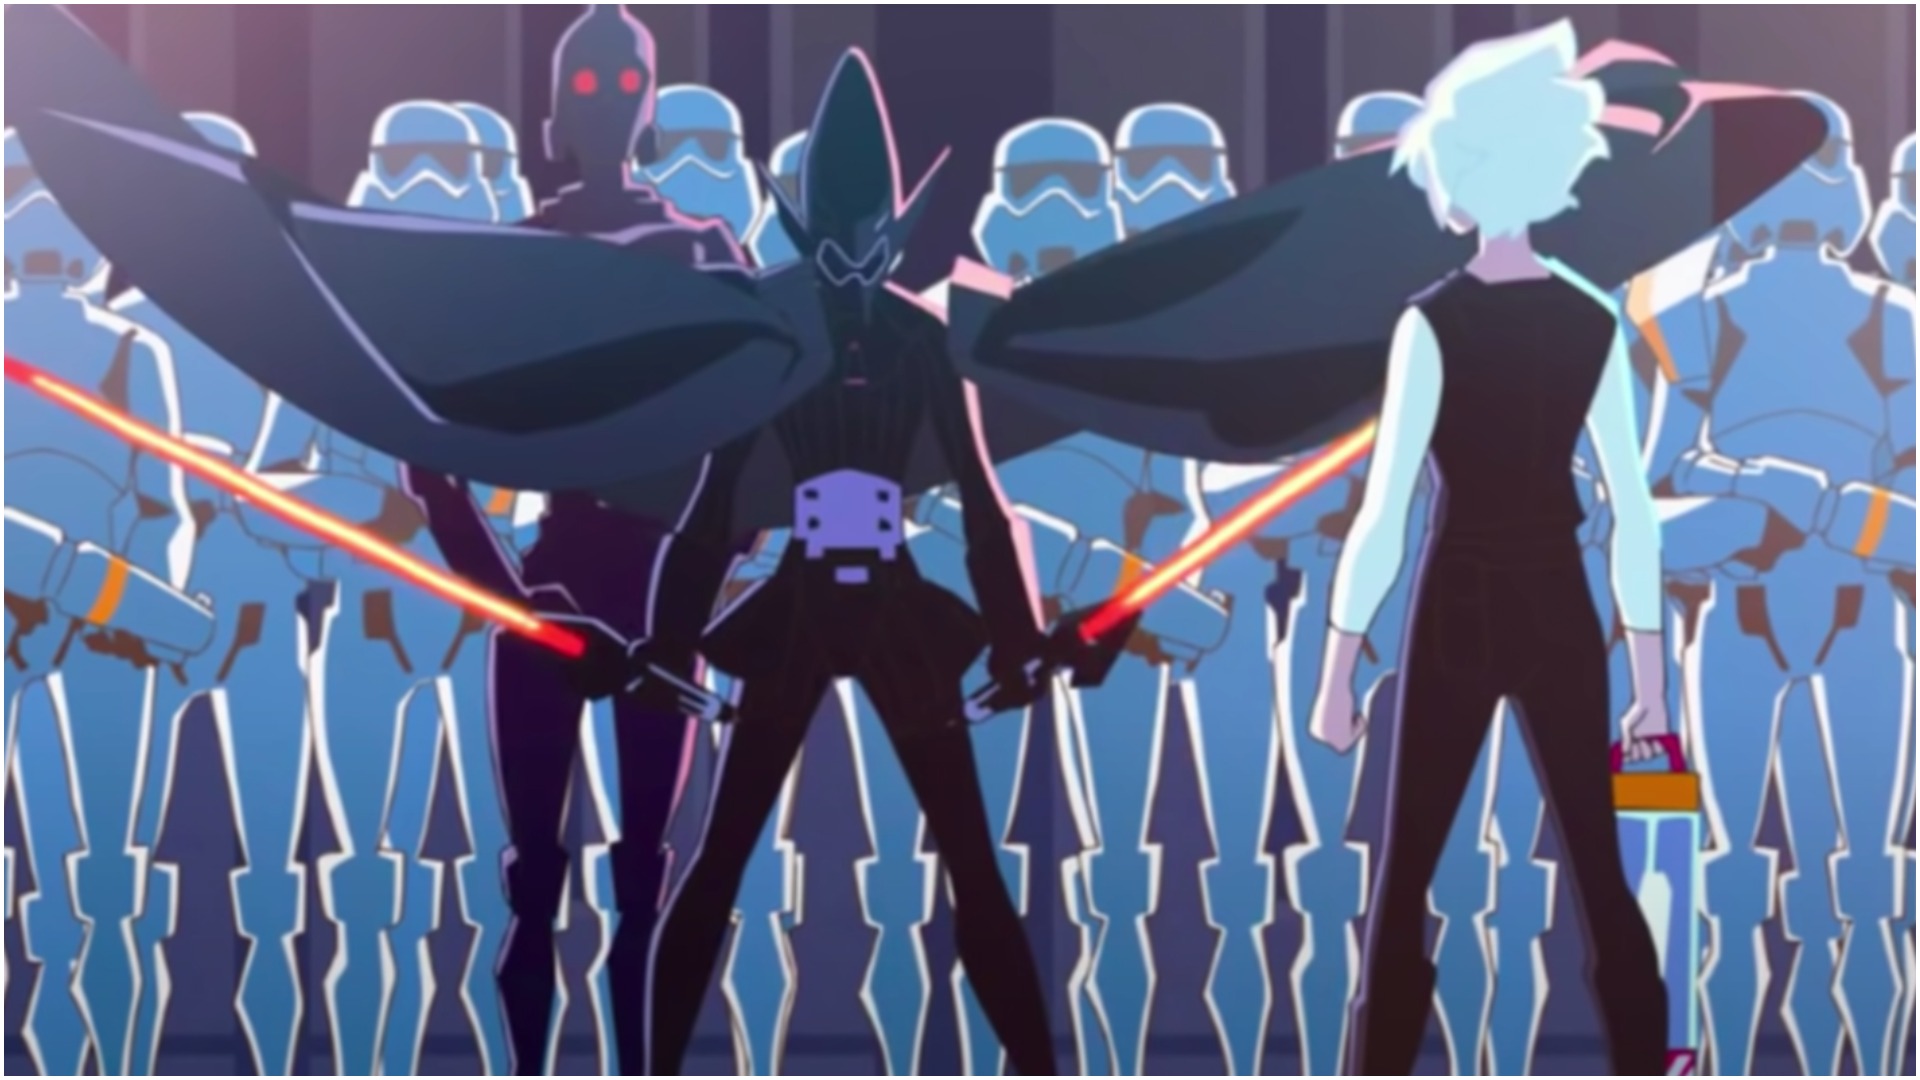 Star Wars: Visions is a series of anime shorts that look amazing